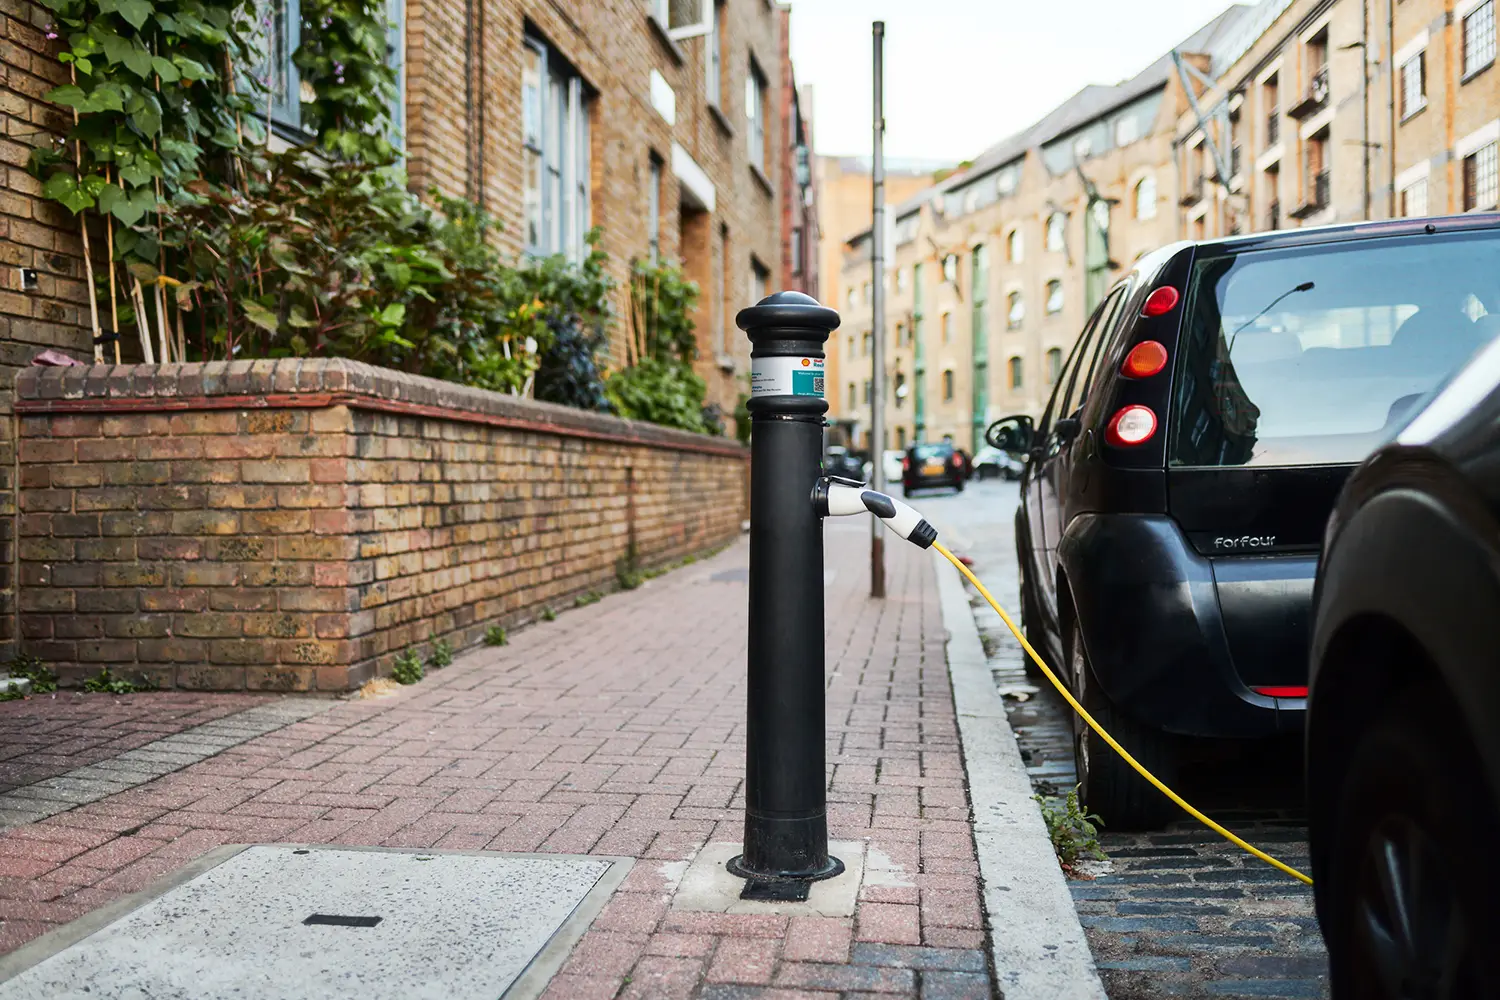 An electric vehicle is charging at an ubitricity-operated Shell Recharge lamppost bollard charge point, offering fair prices, tariffs and costs on a kWh basis.